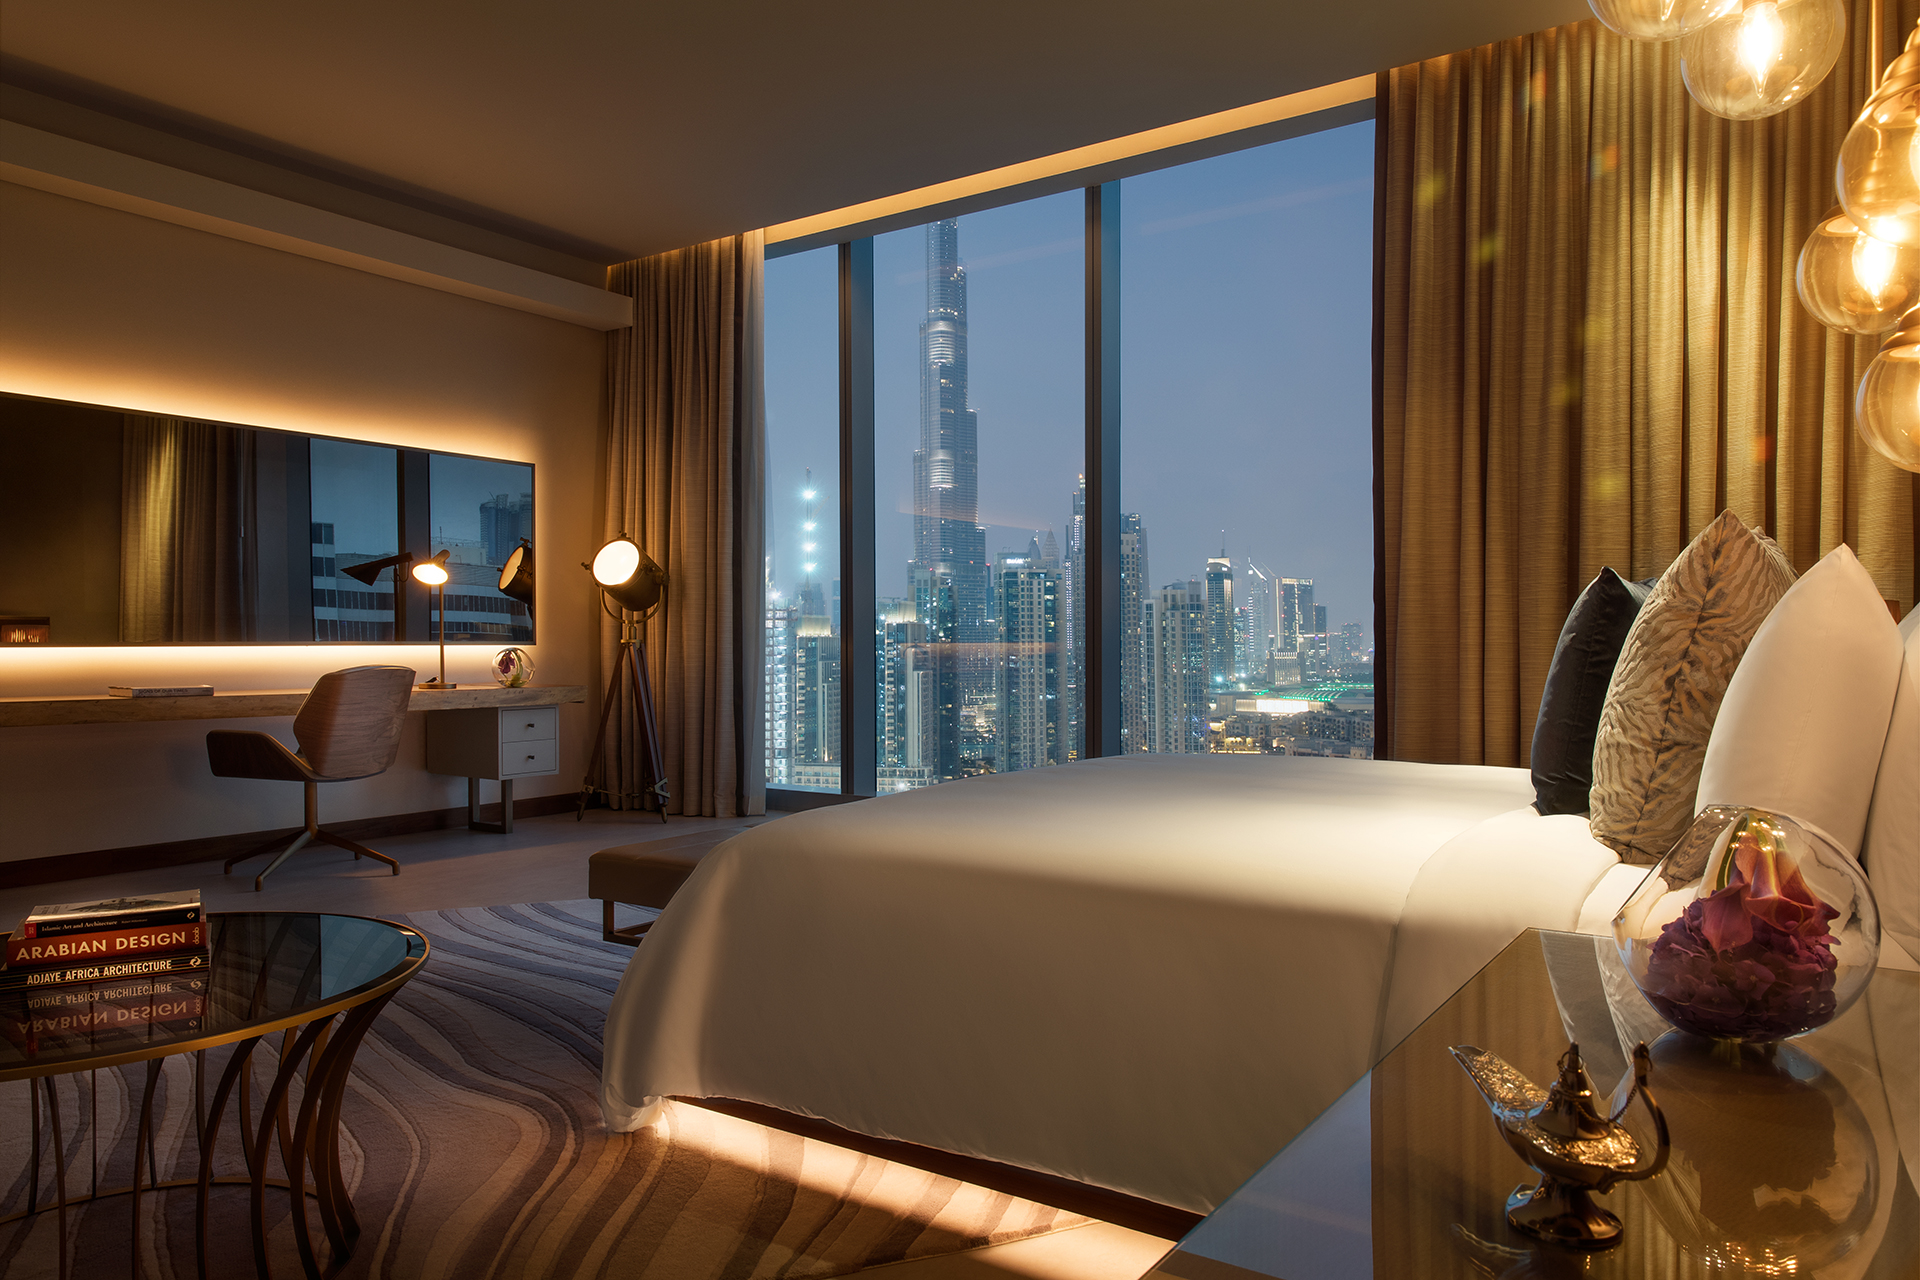 Renaissance Downtown Hotel Dubai offers brunch and staycation package